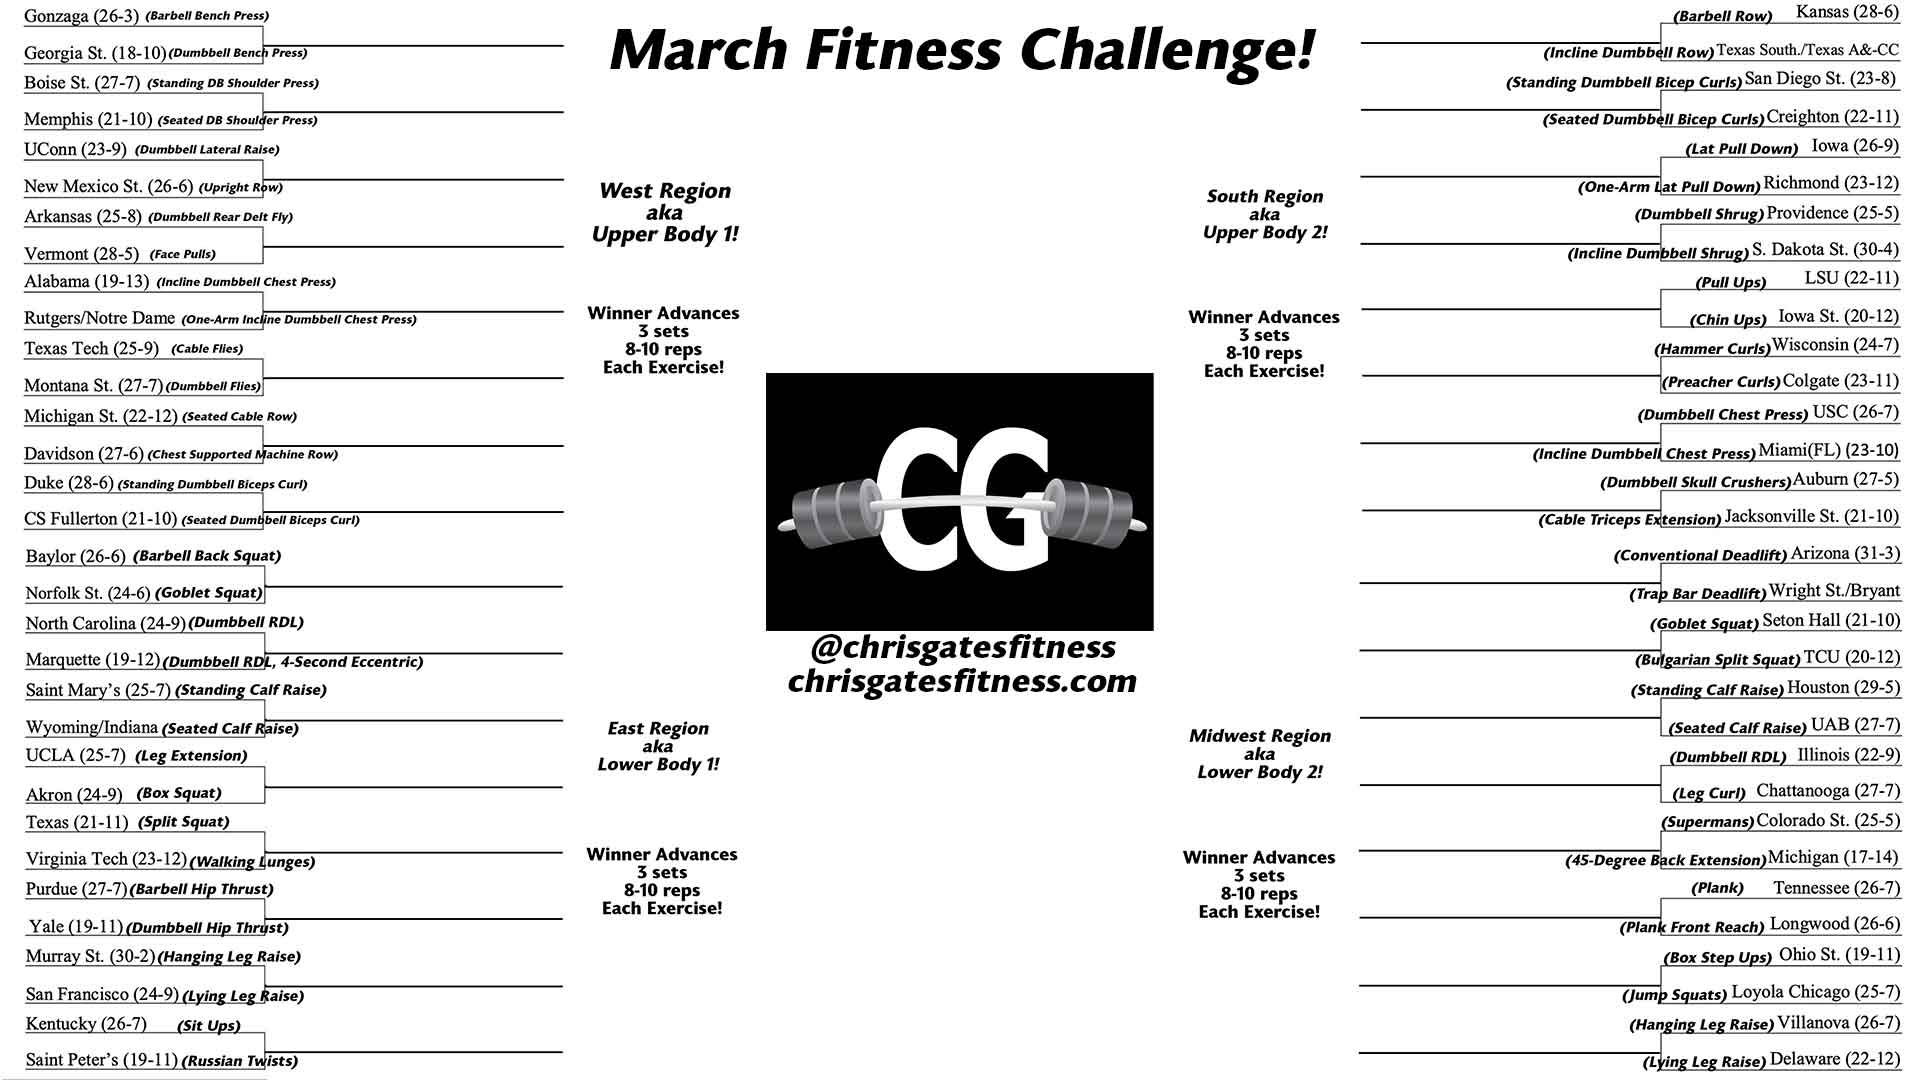 March Fitness Challenge